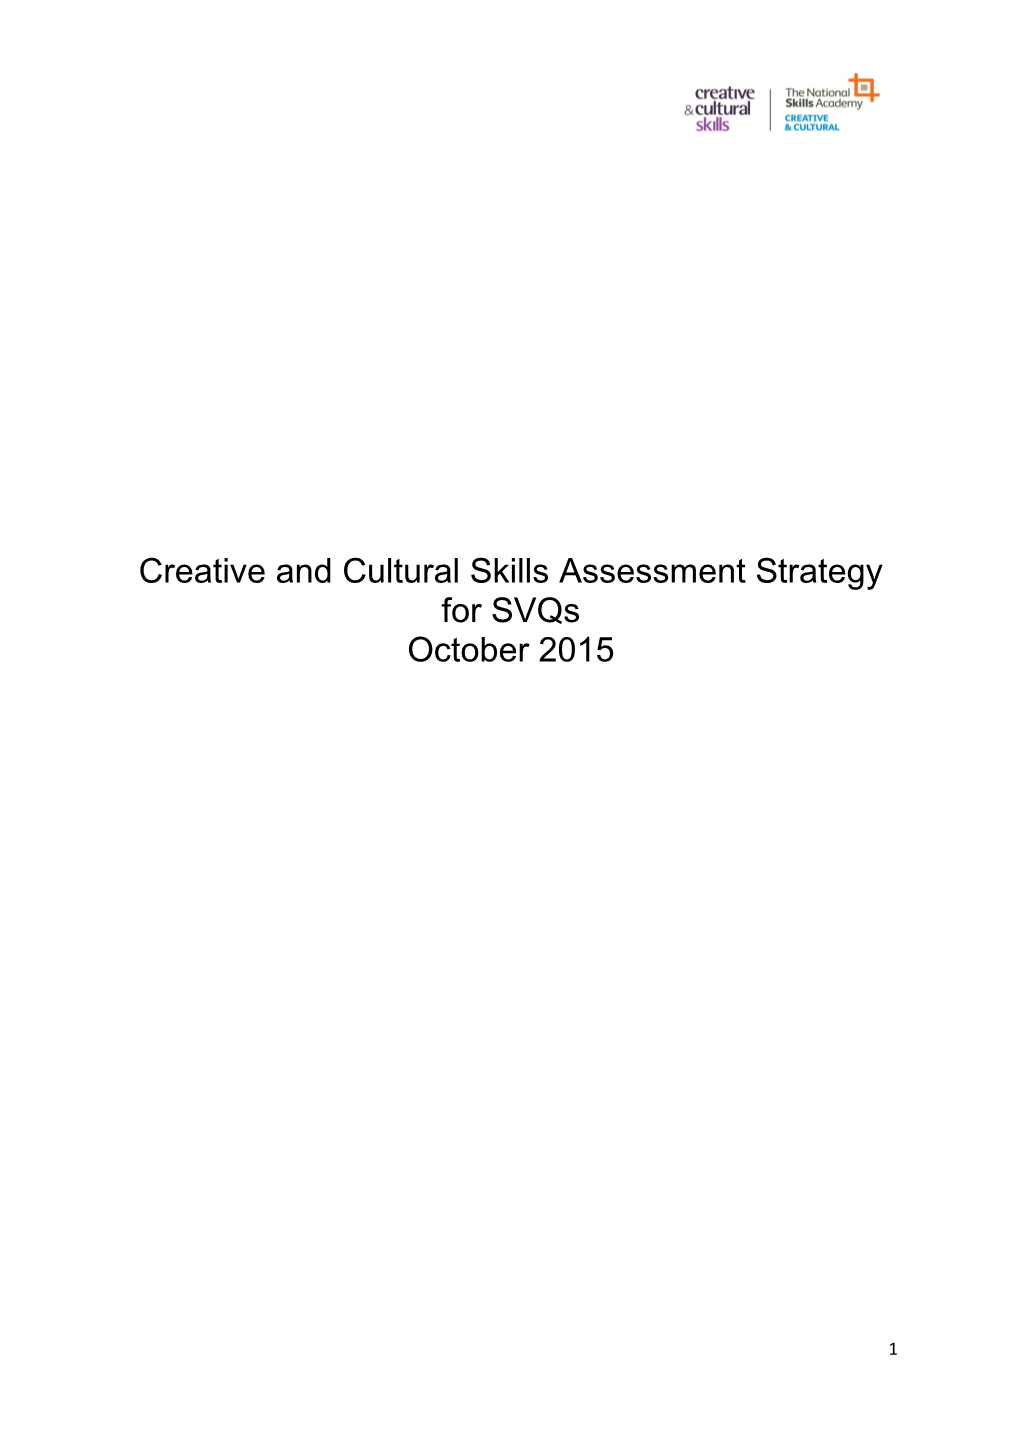 Creative and Cultural Skills Assessment Strategy for Svqs